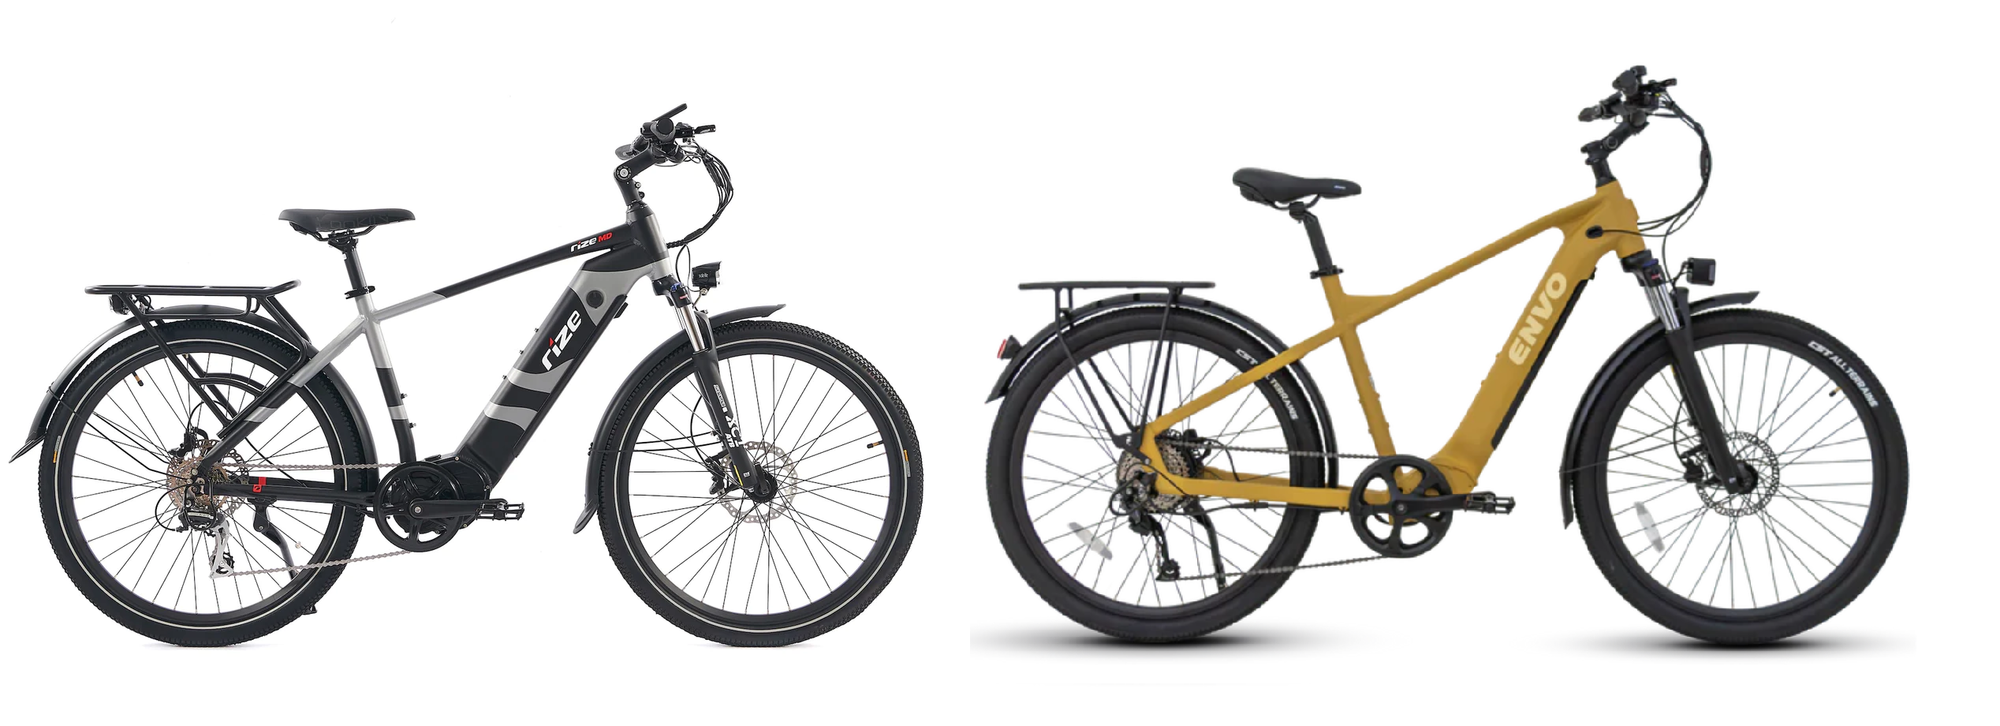 Rize MD (Mid-drive) vs. ENVO D50: A Detailed Review for Urban and Adventure Cyclists